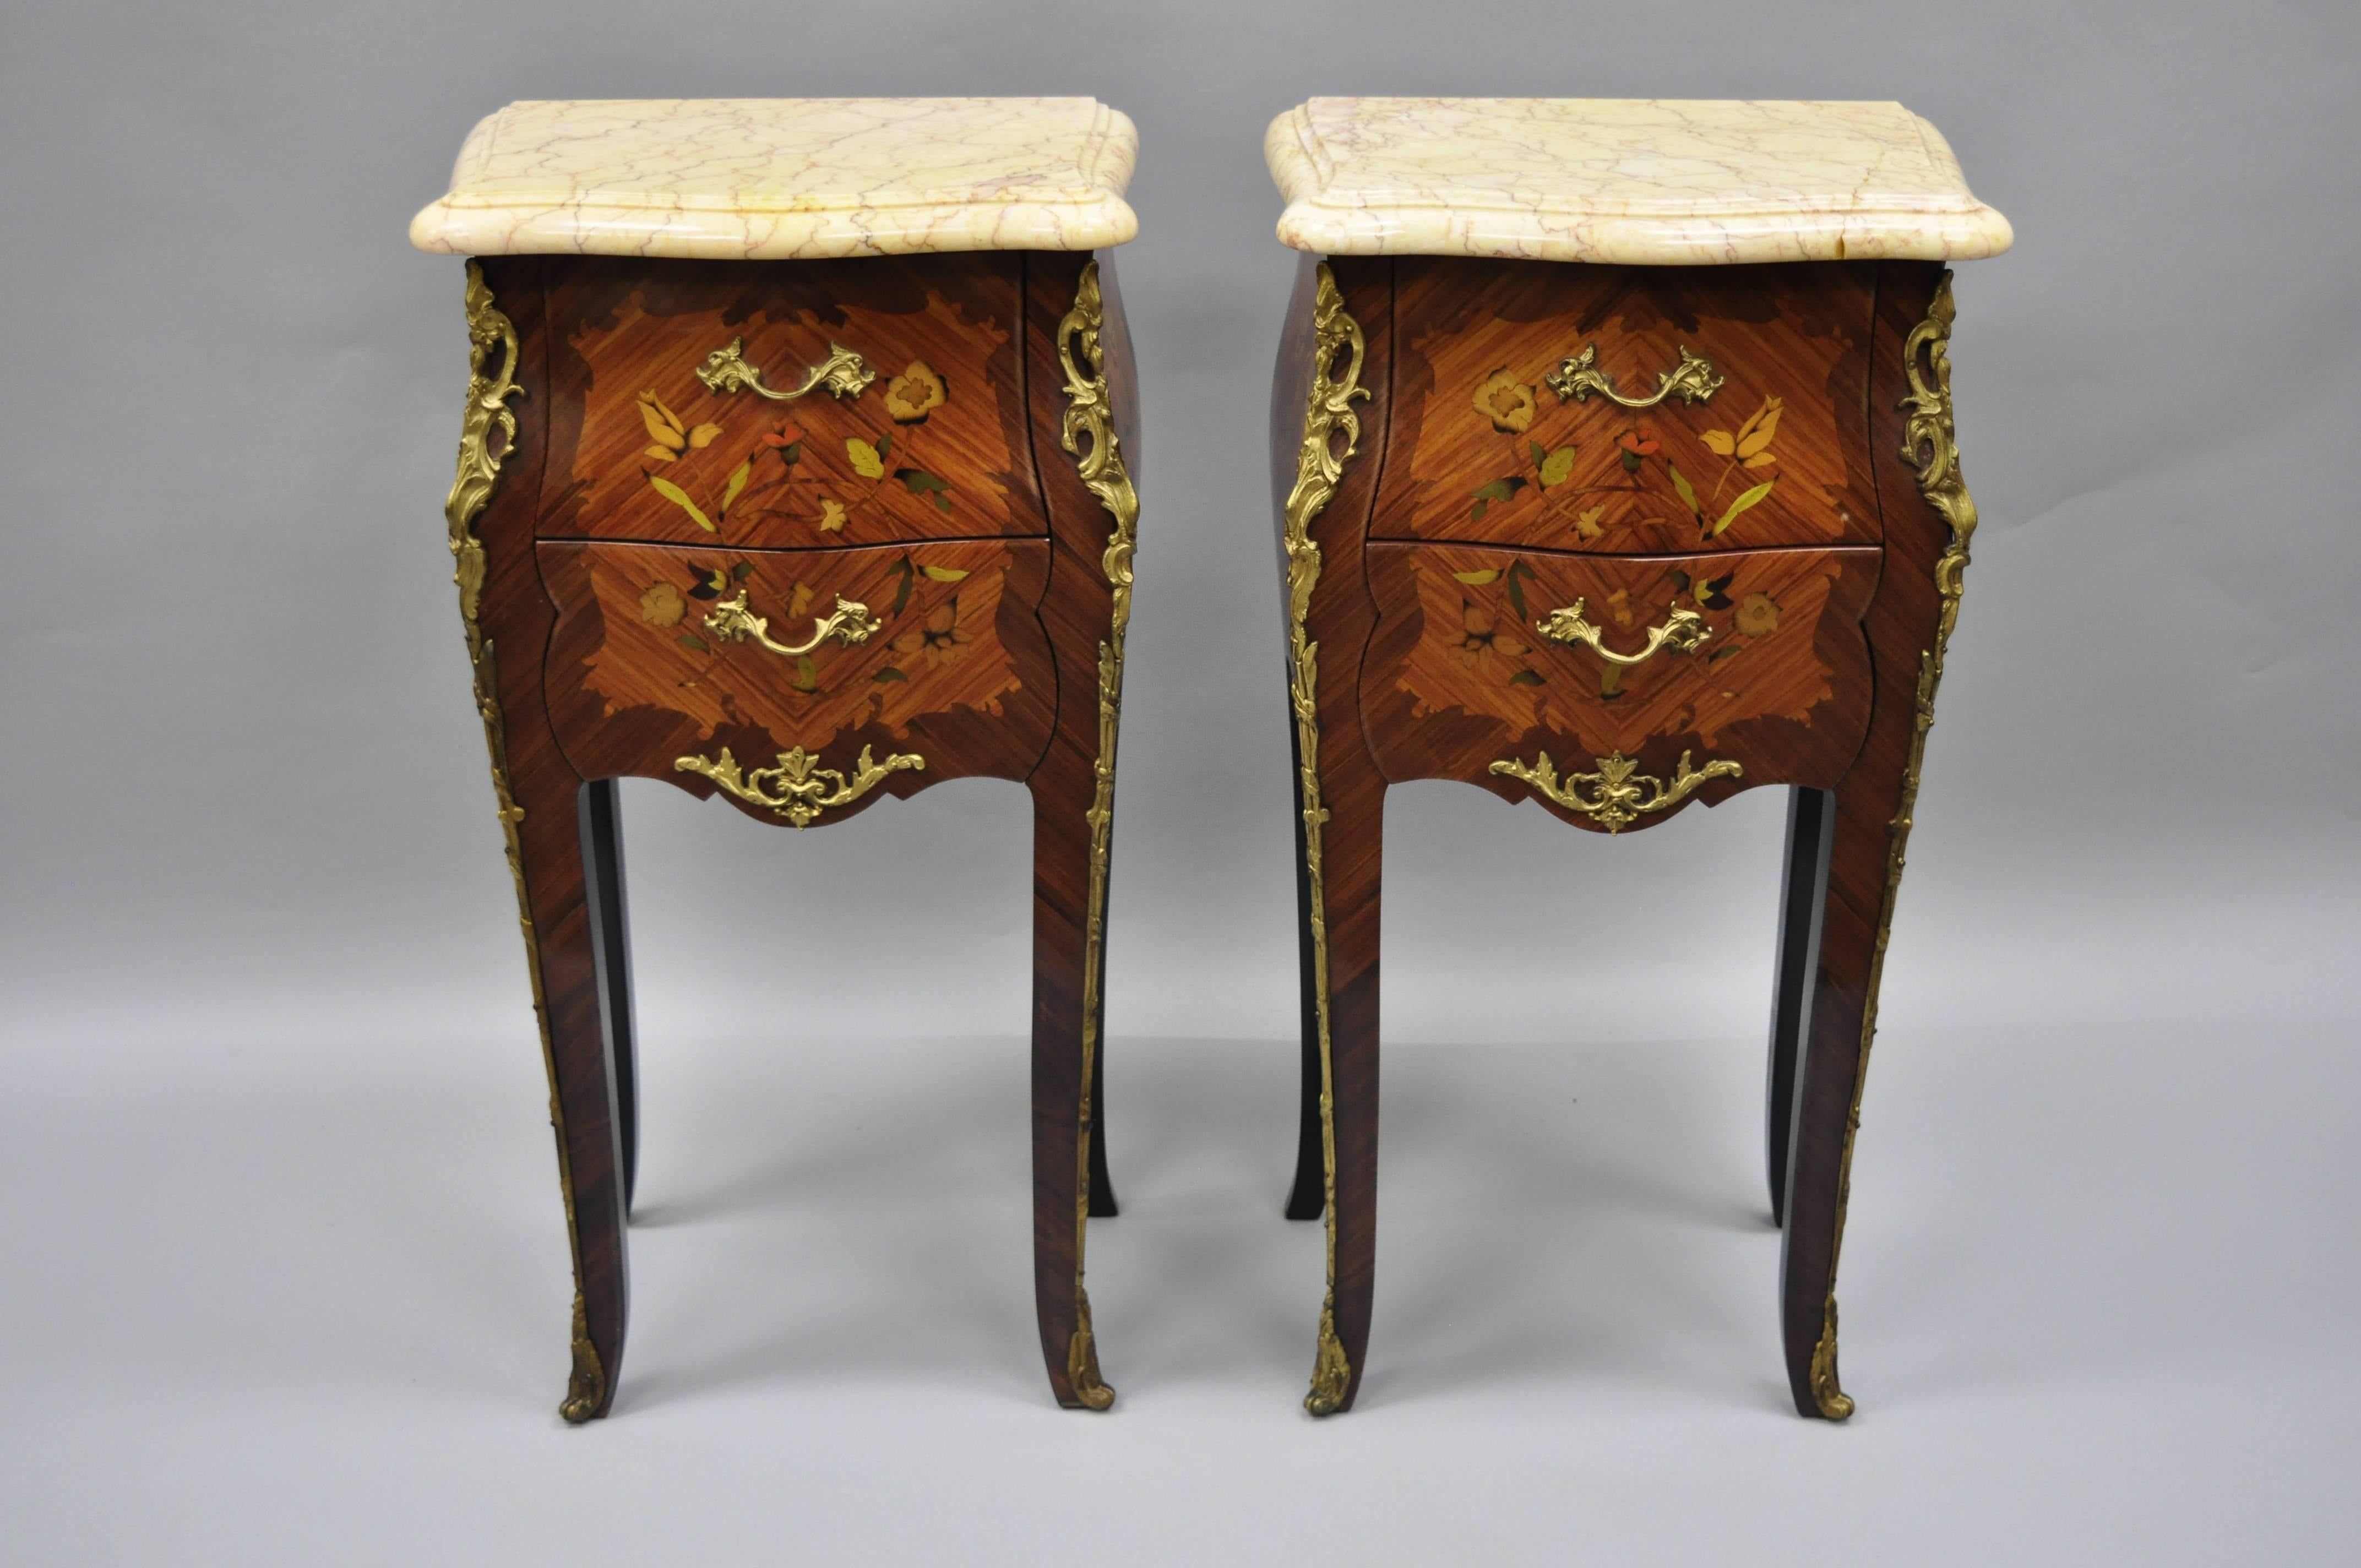 A pair of Louis XV French style bombe form floral inlaid marble-top nightstands. Item features bronze ormolu, floral satinwood inlay, shaped marble top, two dovetailed drawers, cabriole legs, great style and form, circa late 20th century.